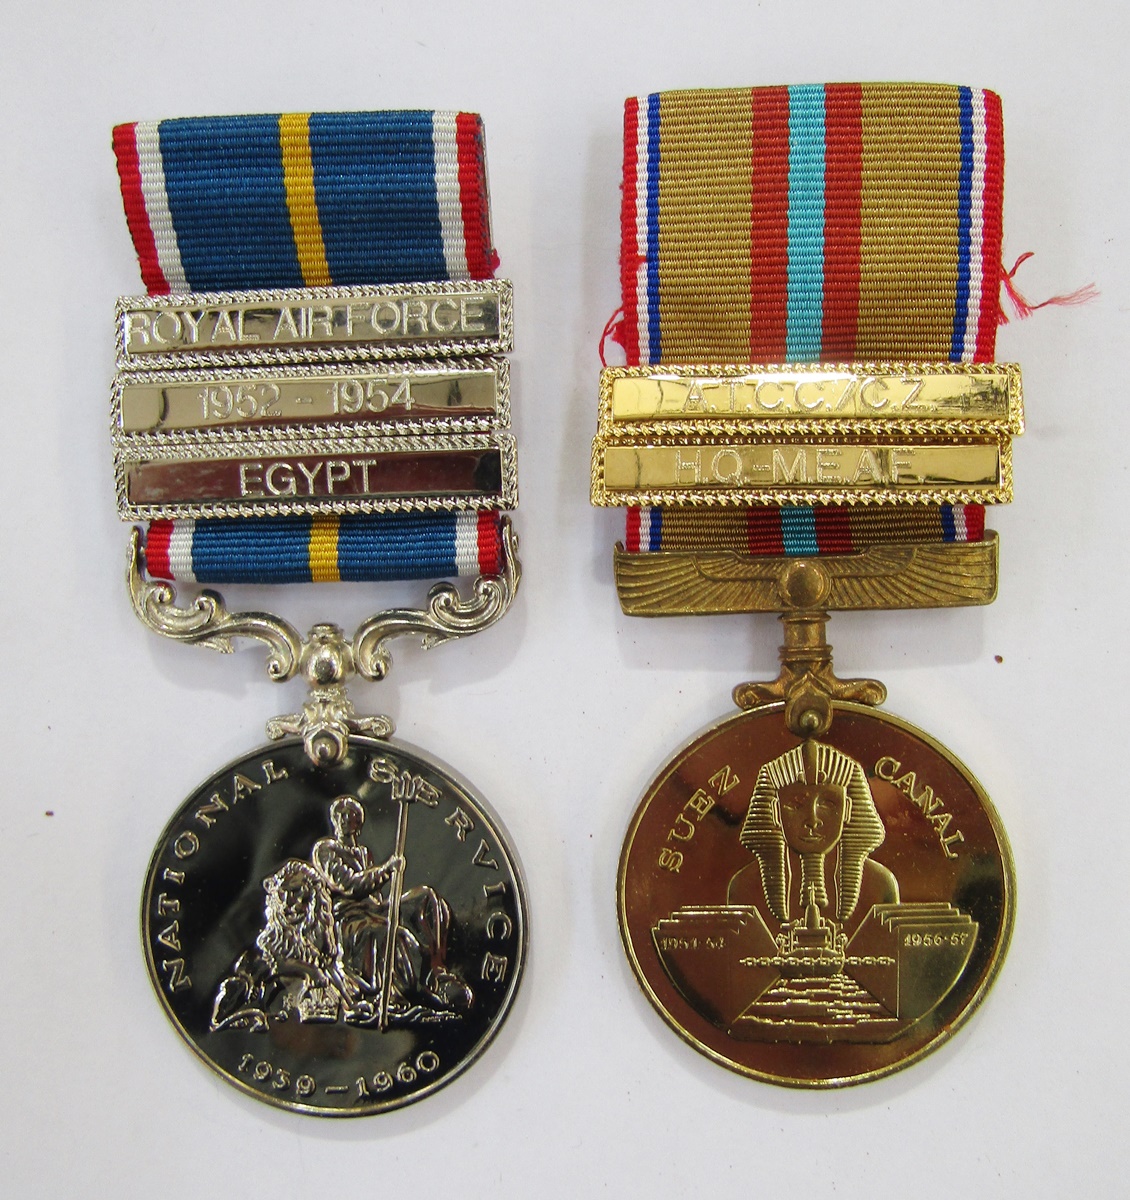 Elizabeth II General Service Medal with canal zone clasp named to "AC2.G.S.Gregory (2555987) RAF", - Image 3 of 8